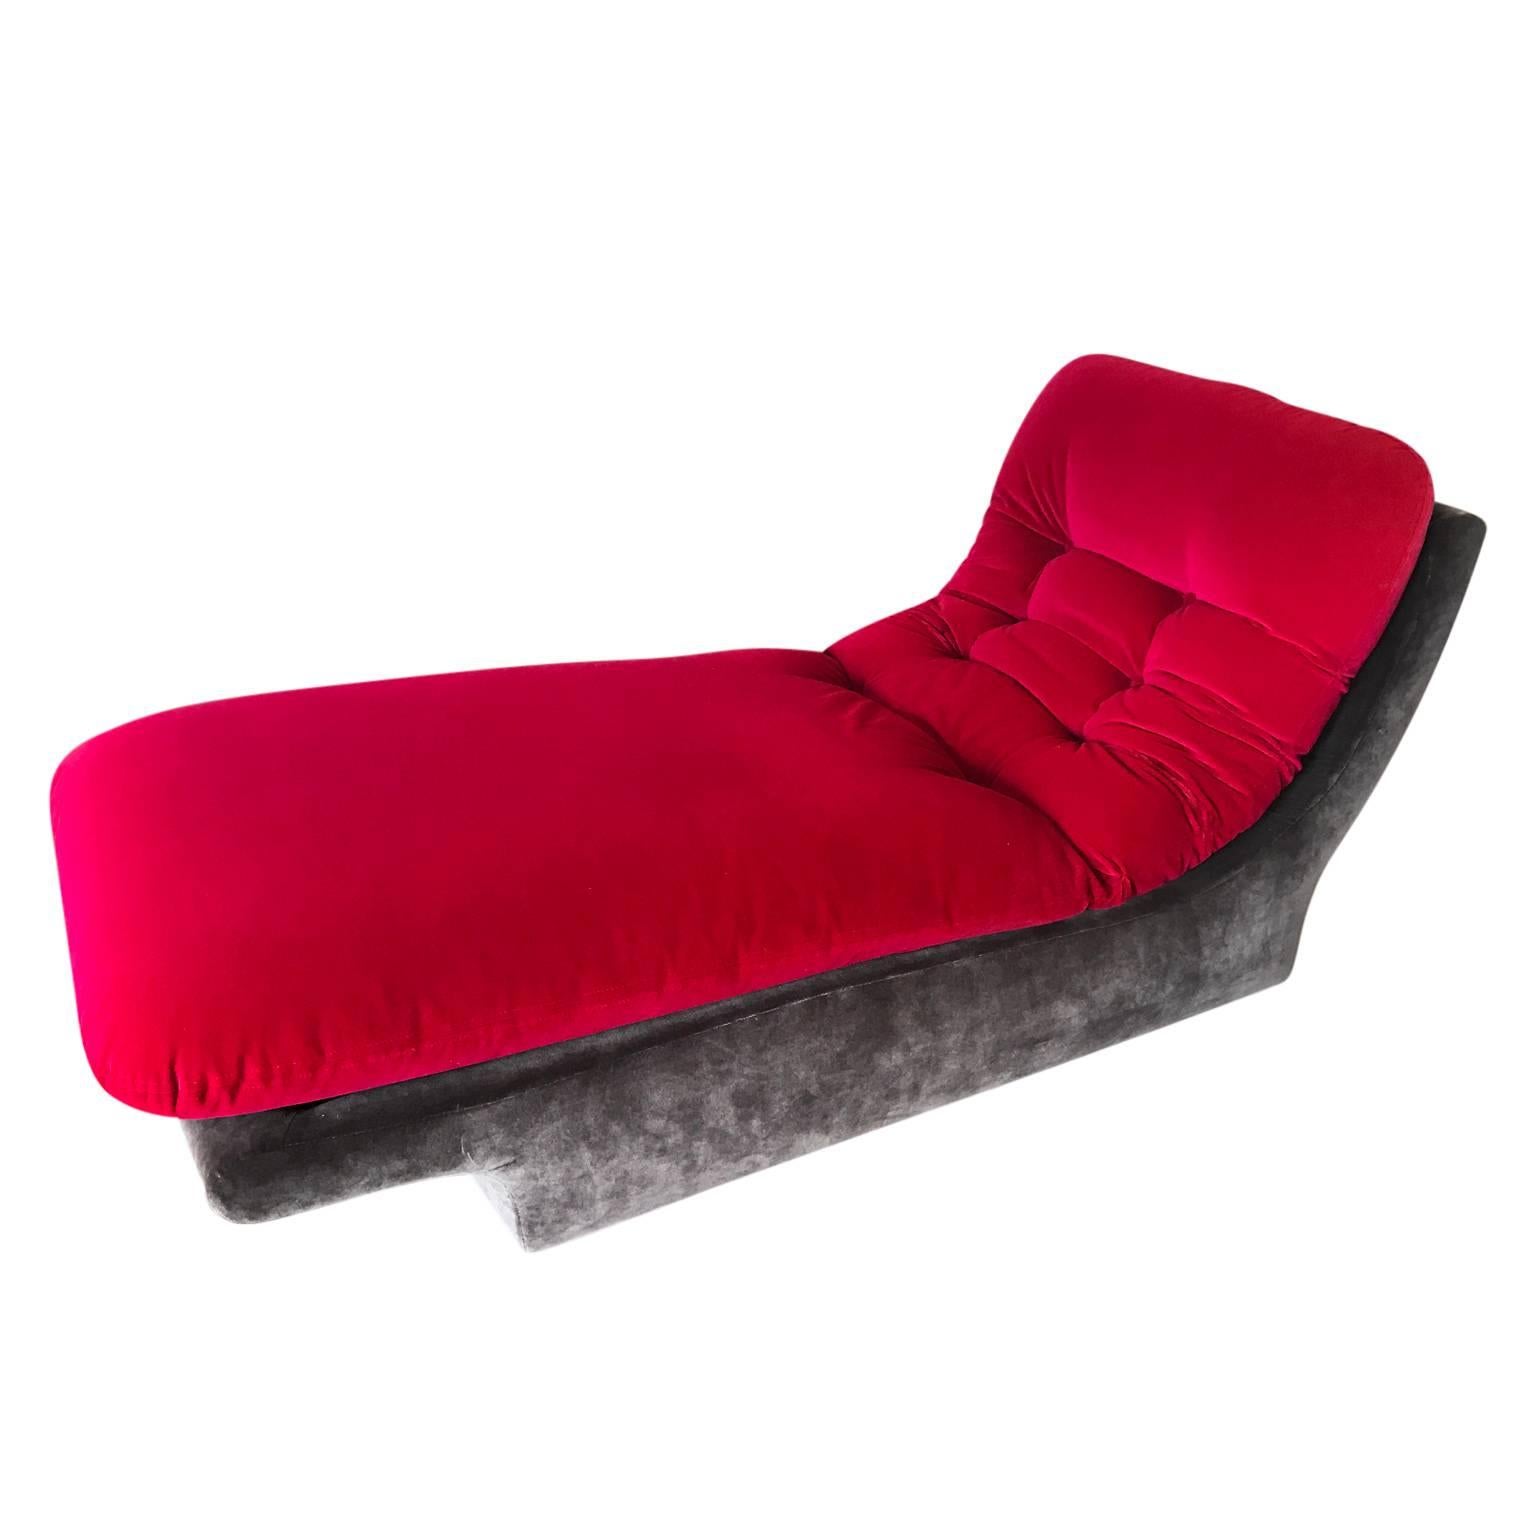 American Modern Modular group for Preview Chaise Lounge Pink and Grey Velvet